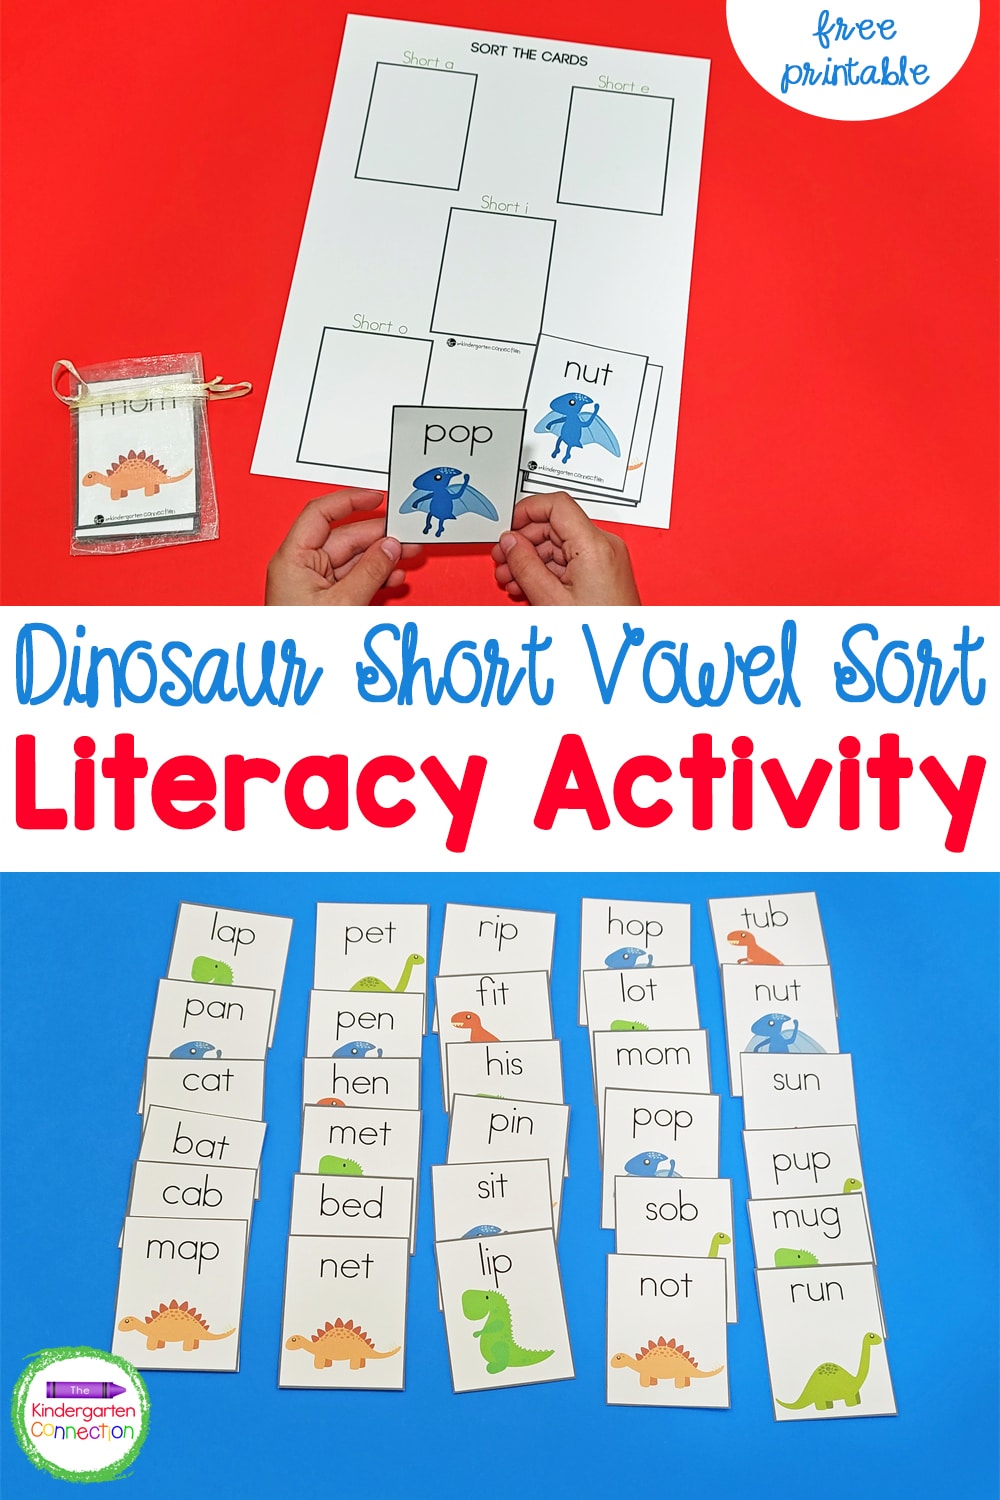 Ths free printable Dinosaur Short Vowel Word Sort Activity is great for Kindergarten small groups and literacy centers!